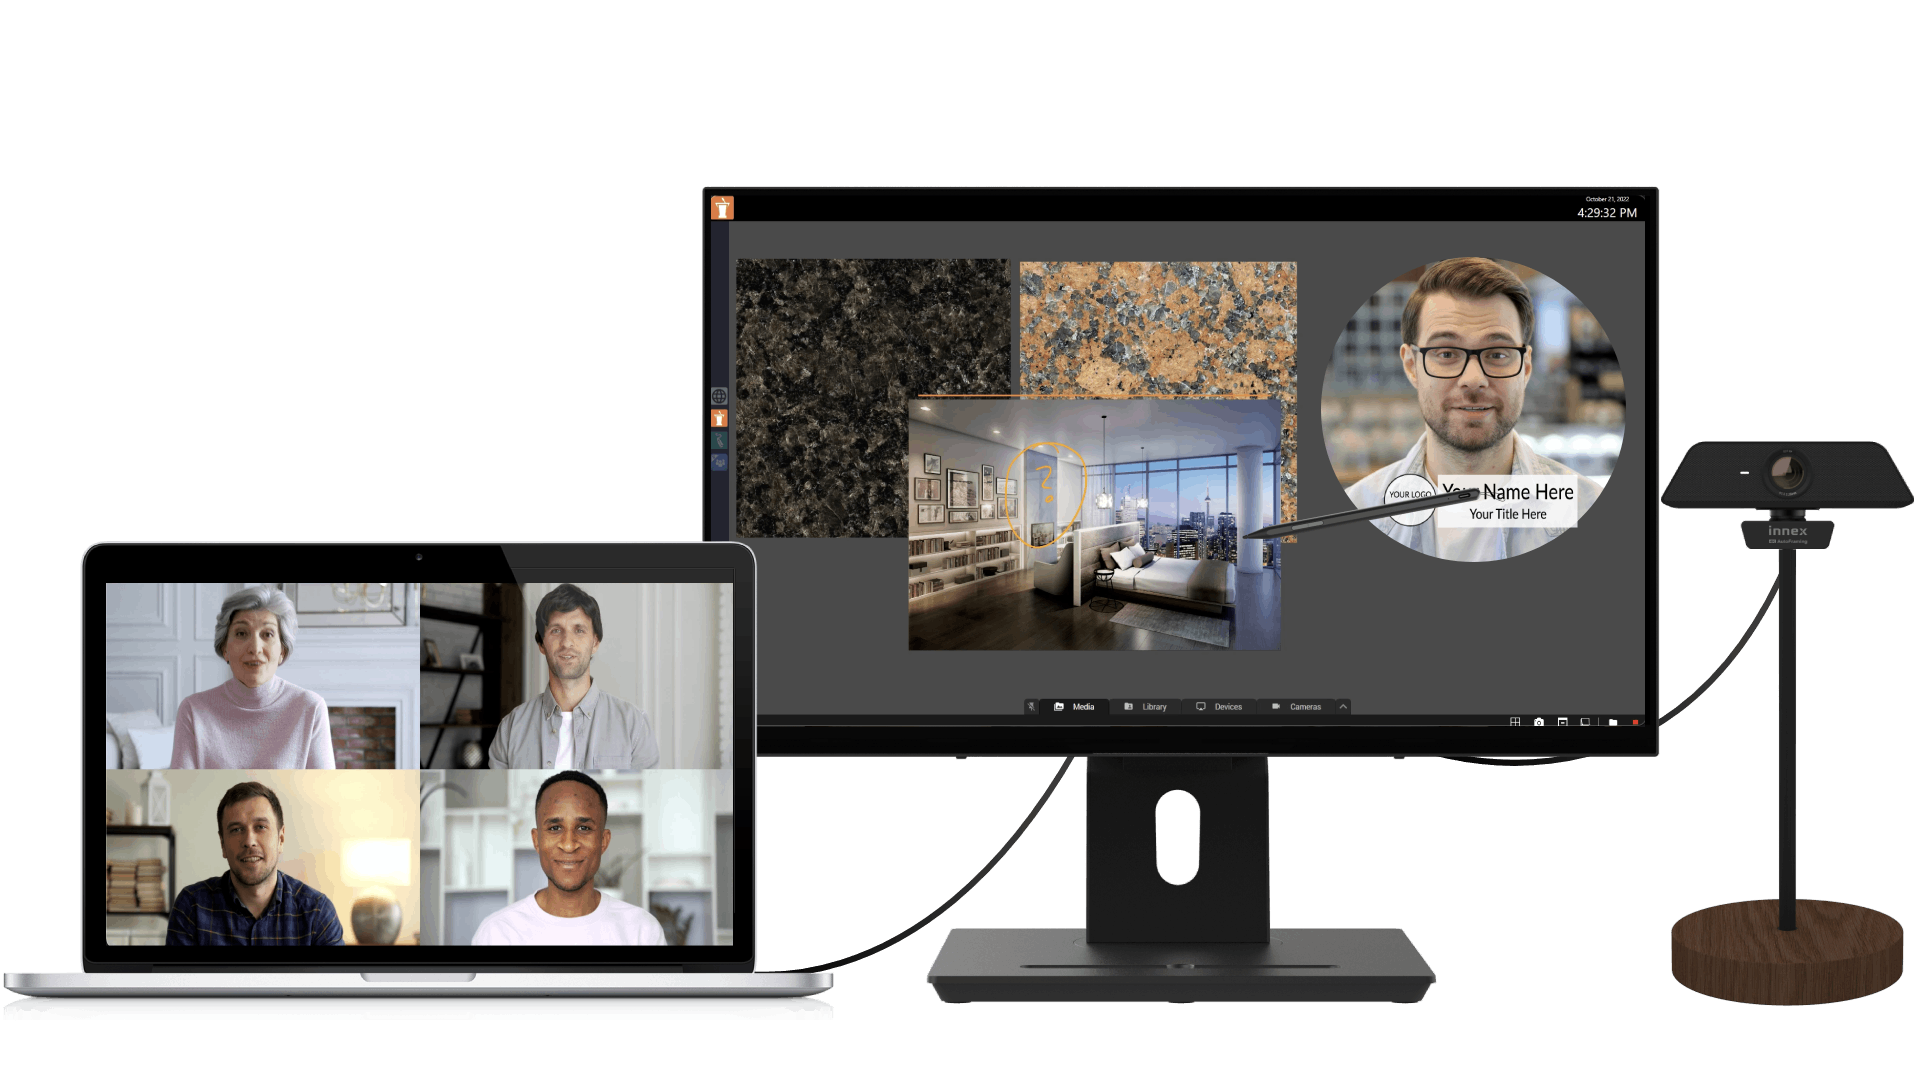 Improve your on-screen presence with the Innex pro webcam